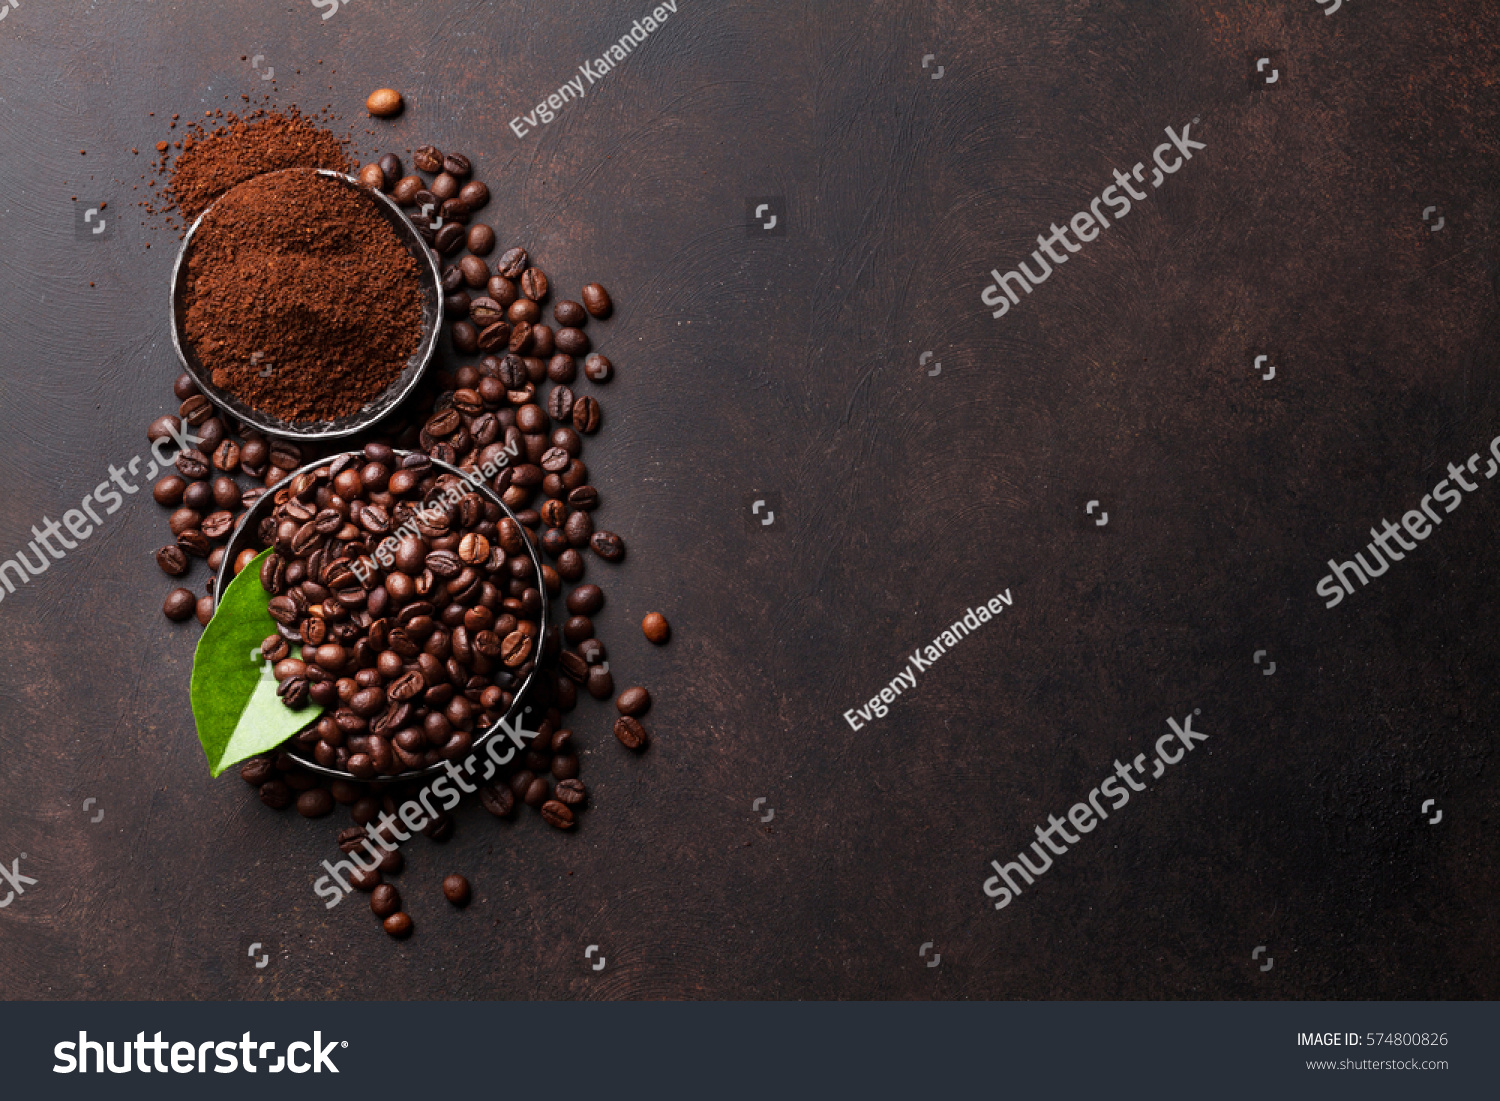 Coffee beans and ground powder on stone background. Top view with copy space for your text  #574800826